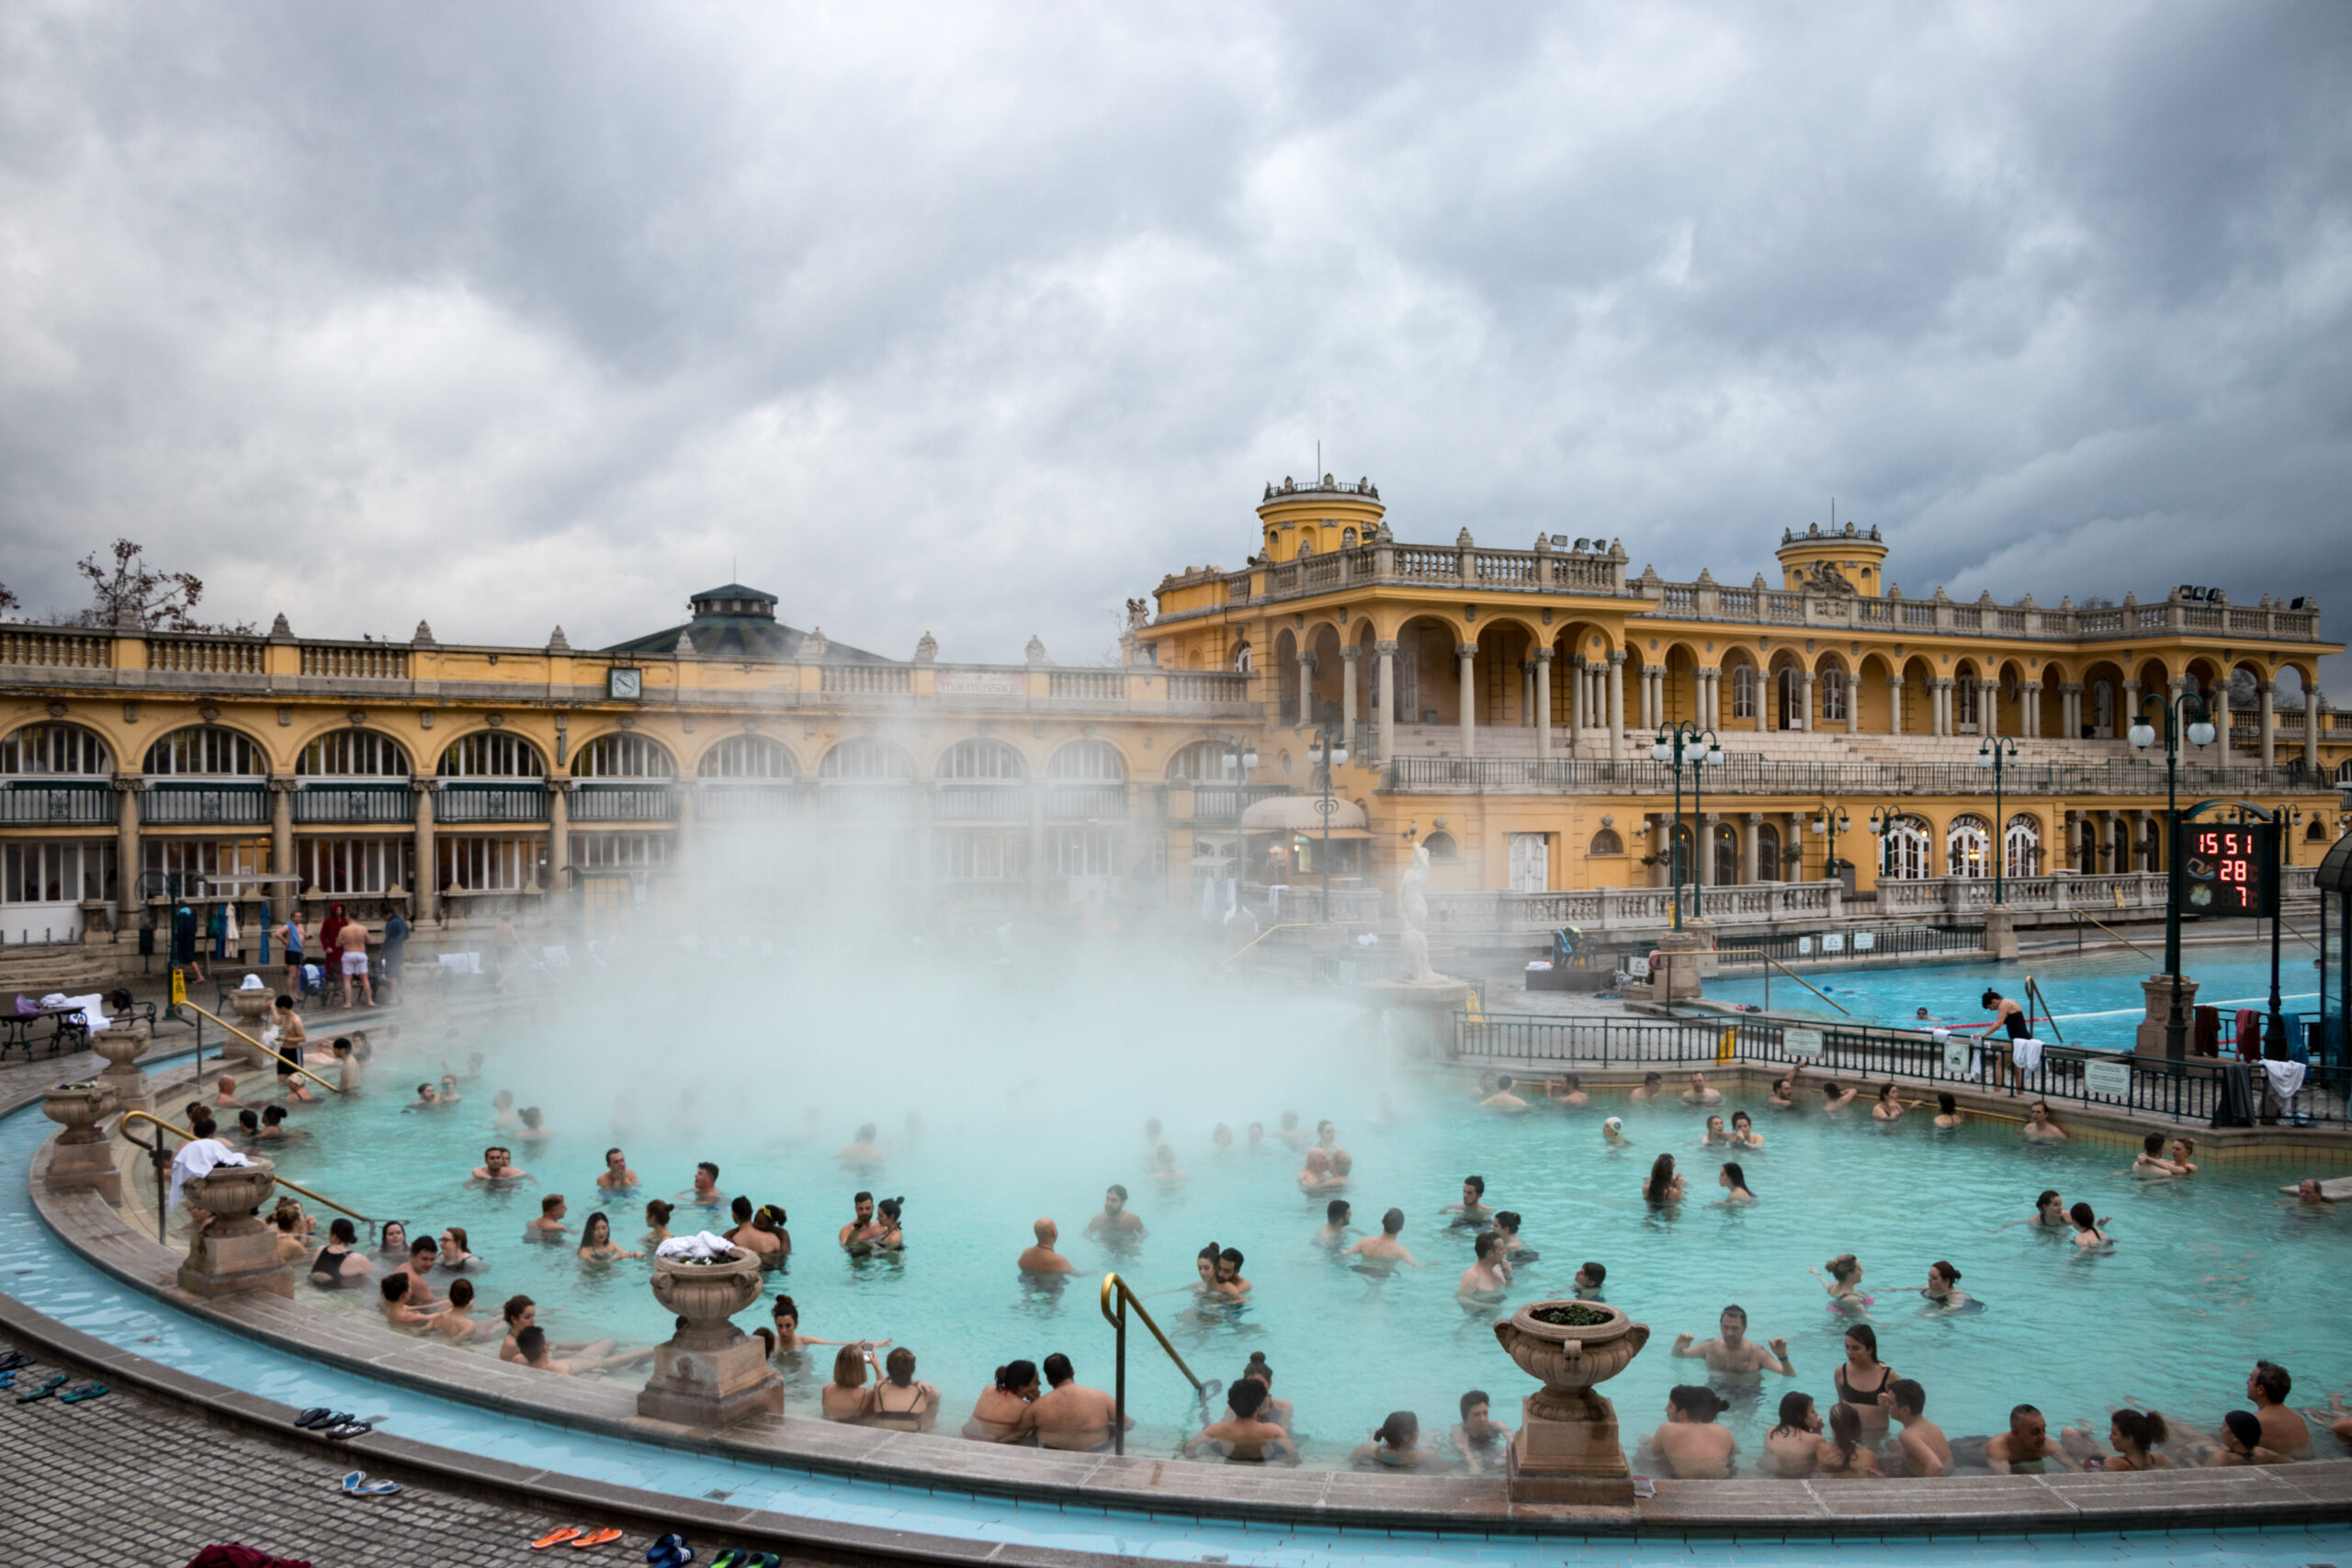 Thermal baths with bathers and classic building in backdrop